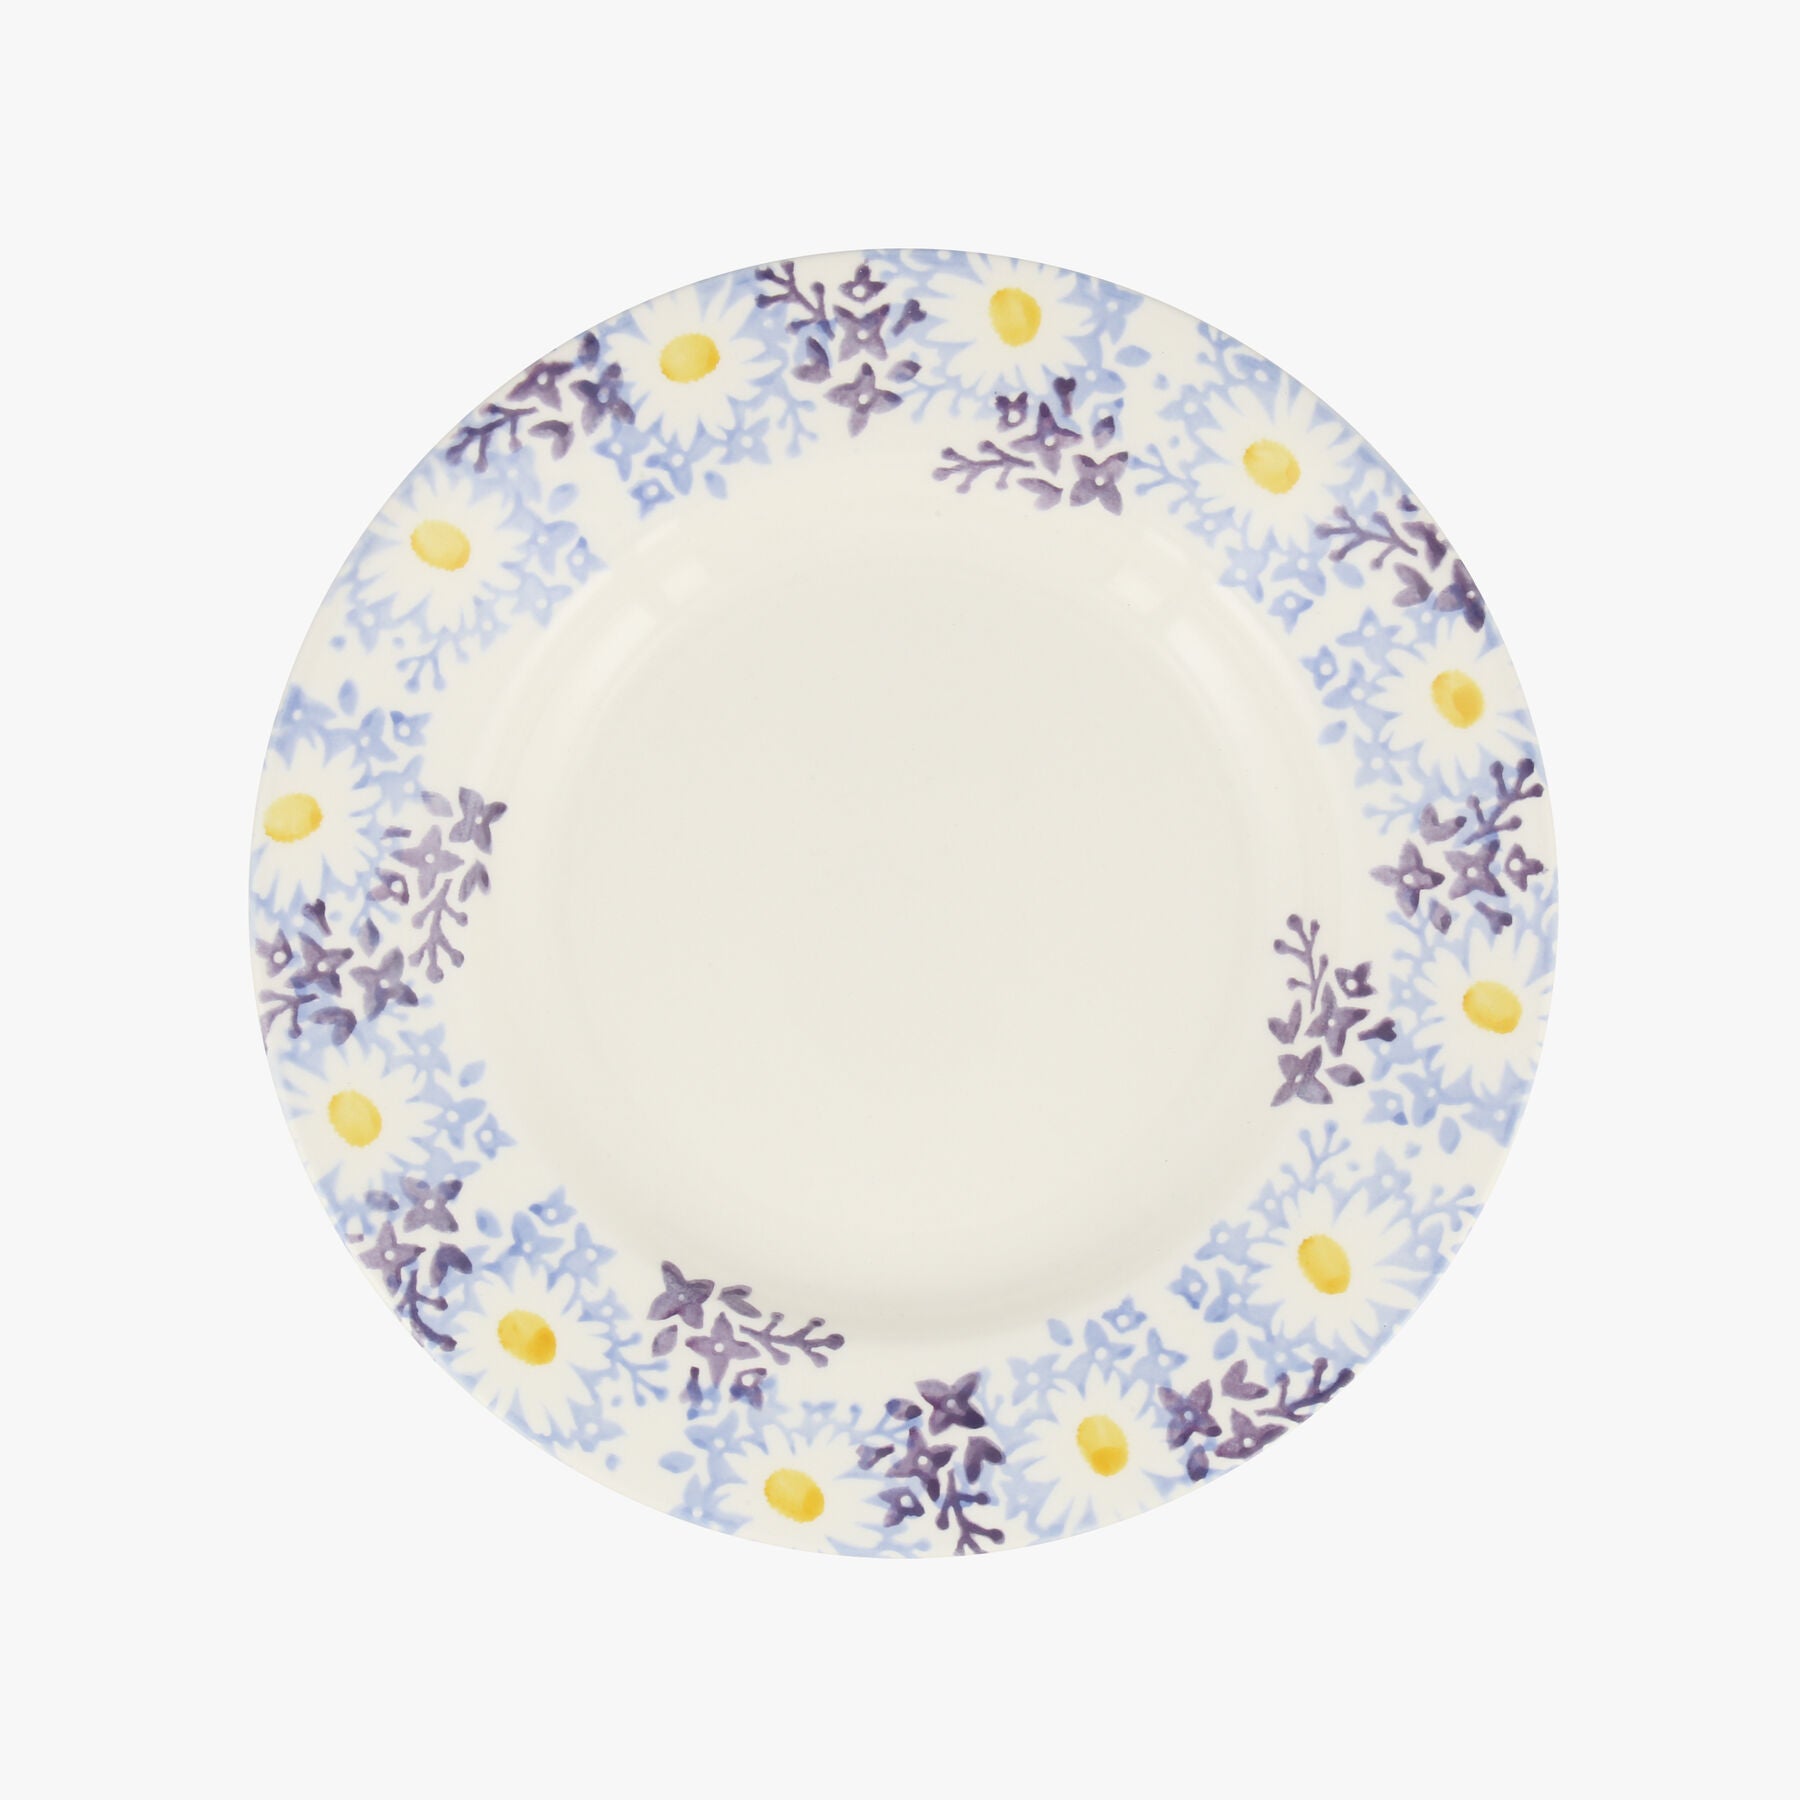 Blue Daisy Fields 8 1/2 Inch Plate - Unique Handmade & Handpainted English Earthenware British-Made 